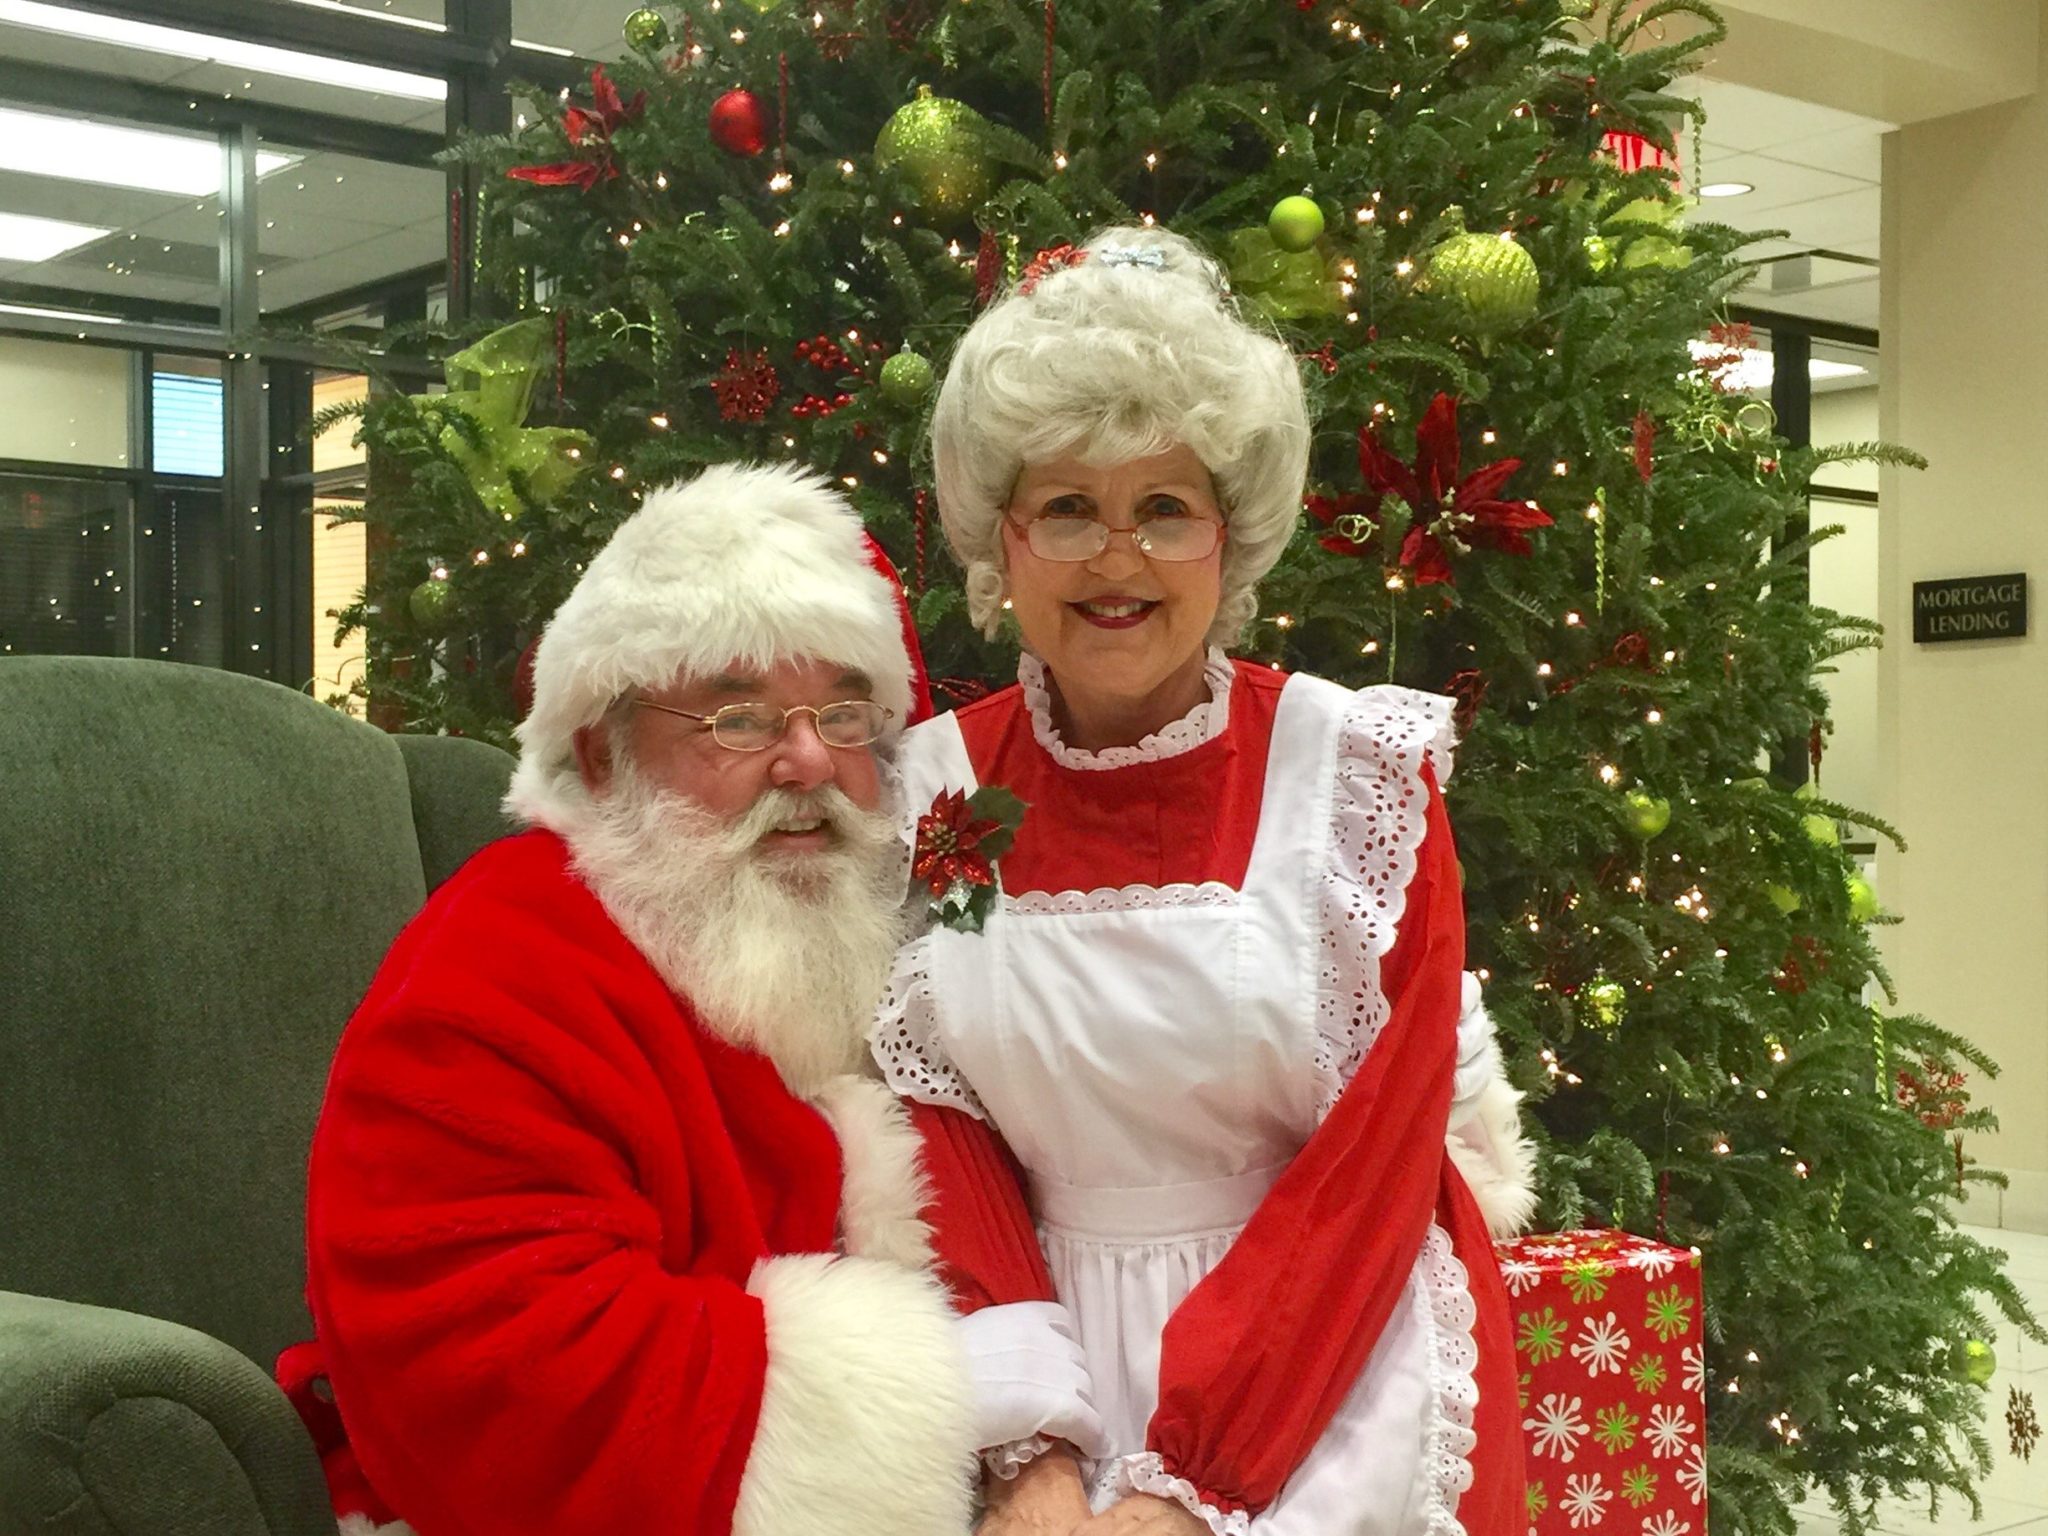 Jingle All the Way with Santa and Mrs. Claus Metairie Bank.